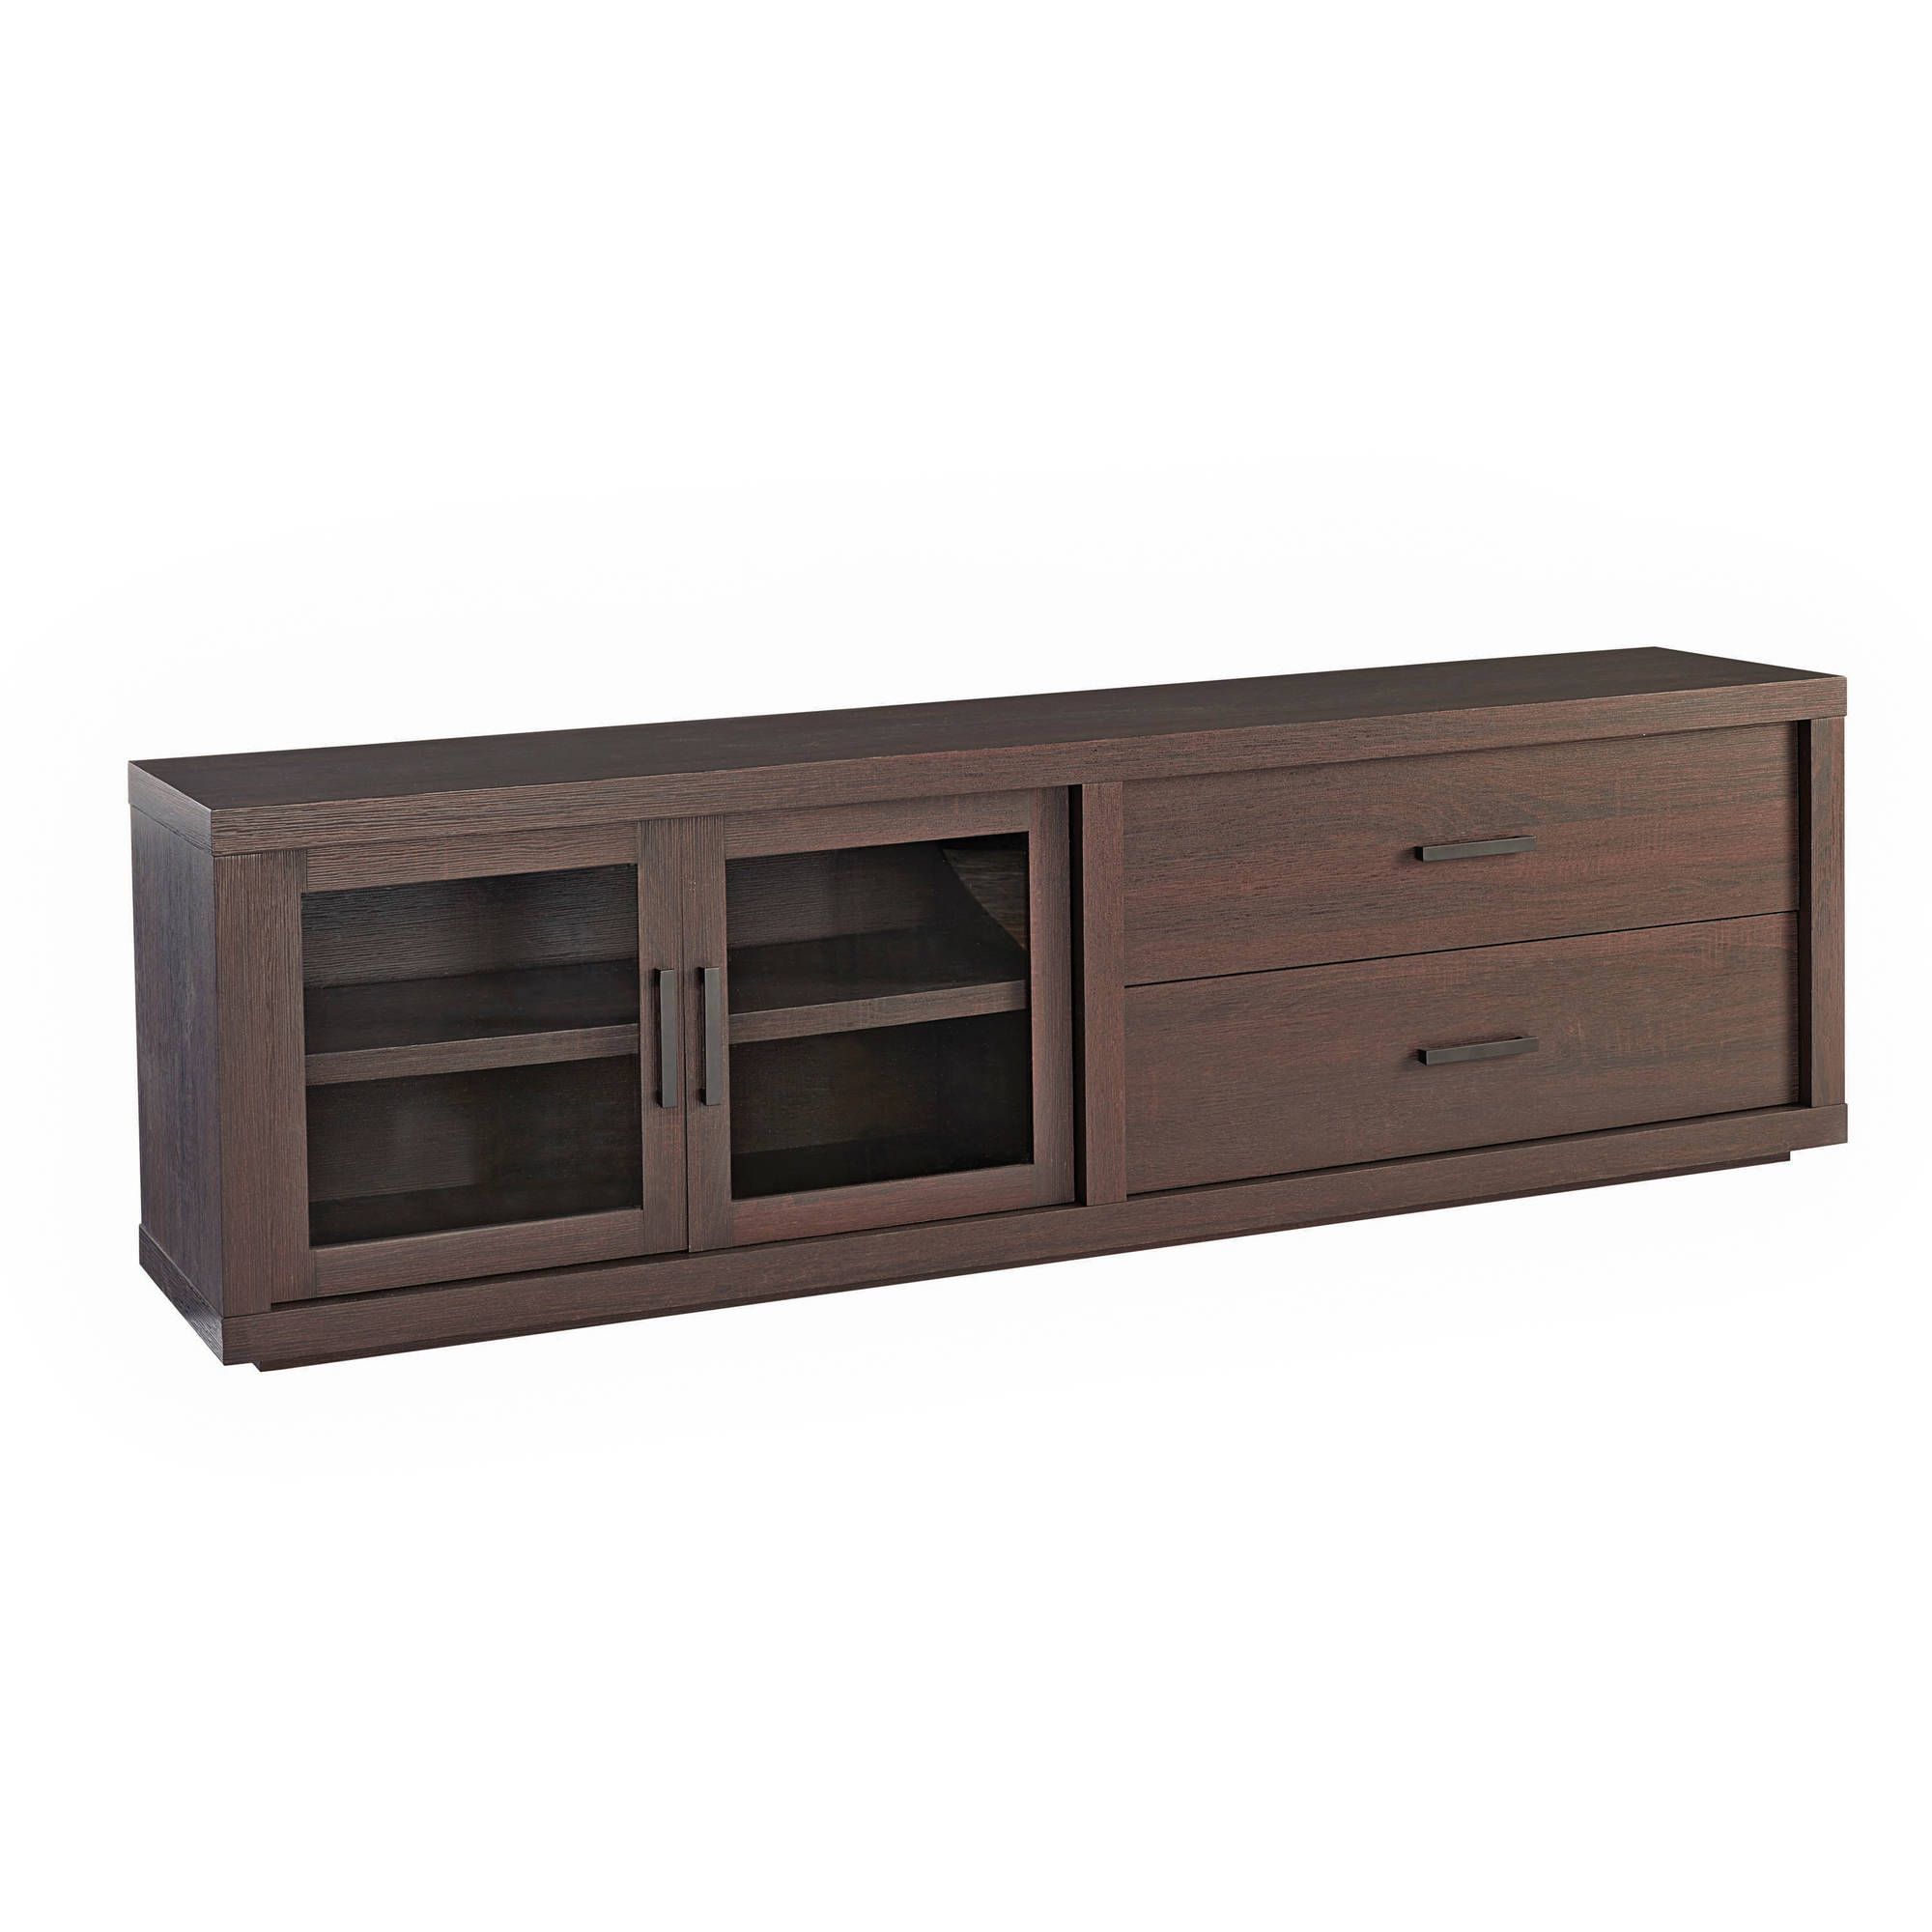 Newest 80 Inch Tv Stands With Regard To 80 Inch Tv Stand 65in 70" 75" With Storage Drawers Walnut Dvd Wood (View 14 of 20)